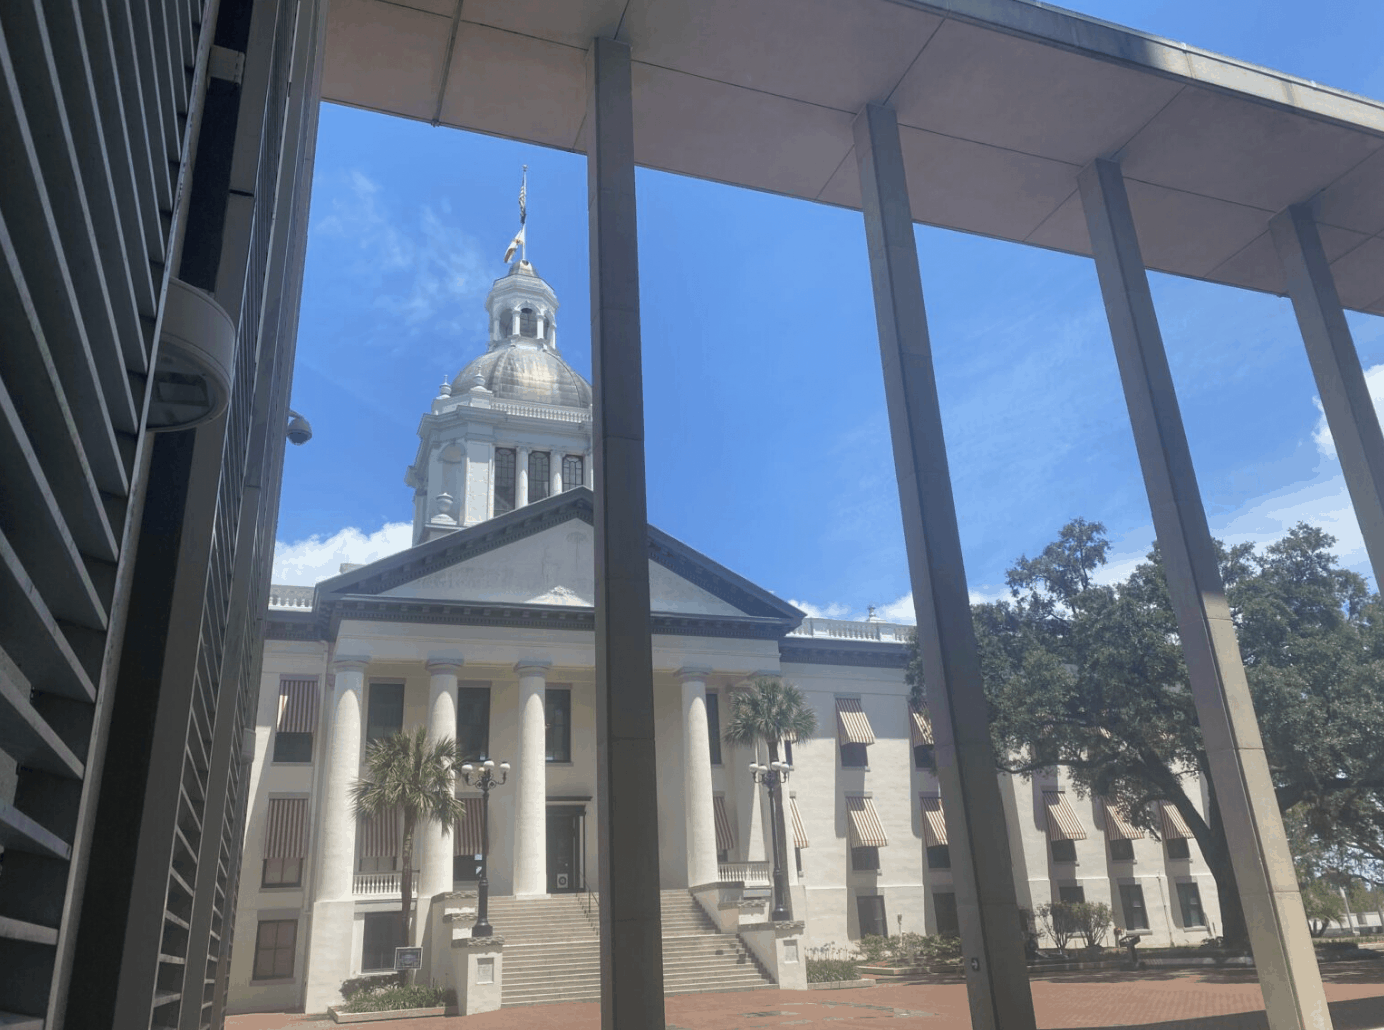 Florida's Old Capitol seen through the colonade of the New Capitol. Credit: Michael Moline